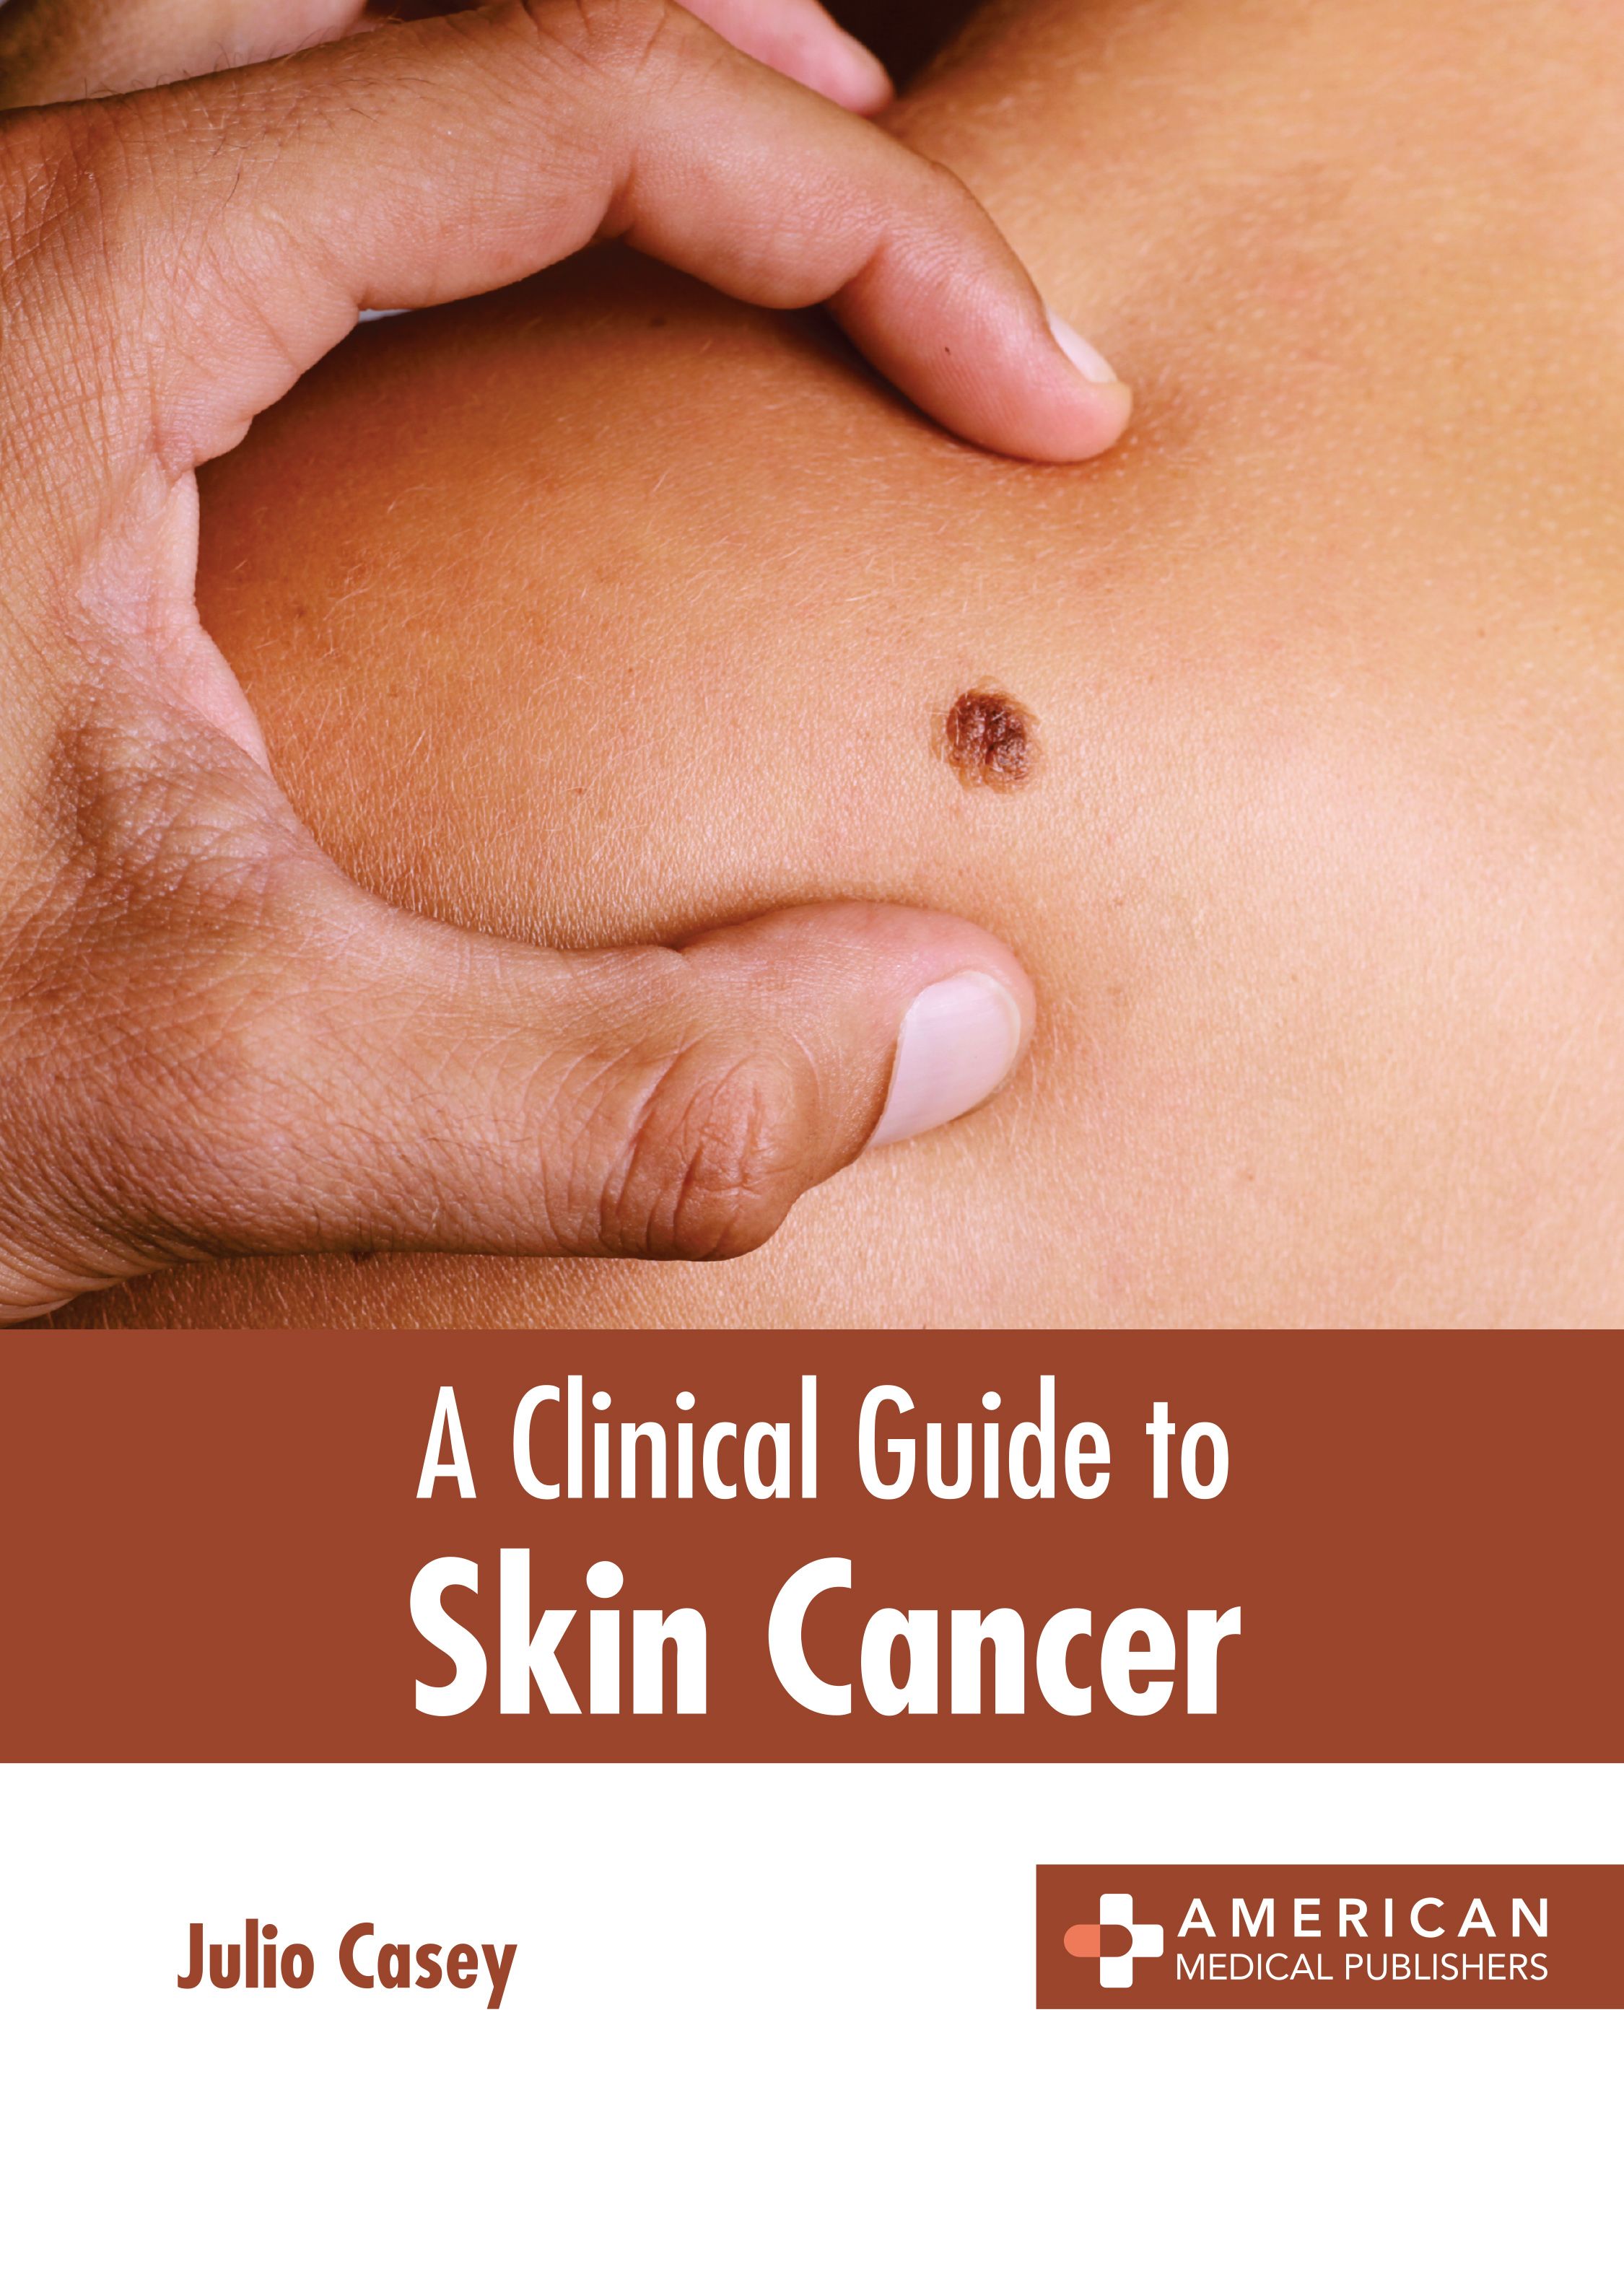 

exclusive-publishers/american-medical-publishers/a-clinical-guide-to-skin-cancer-9781639278411